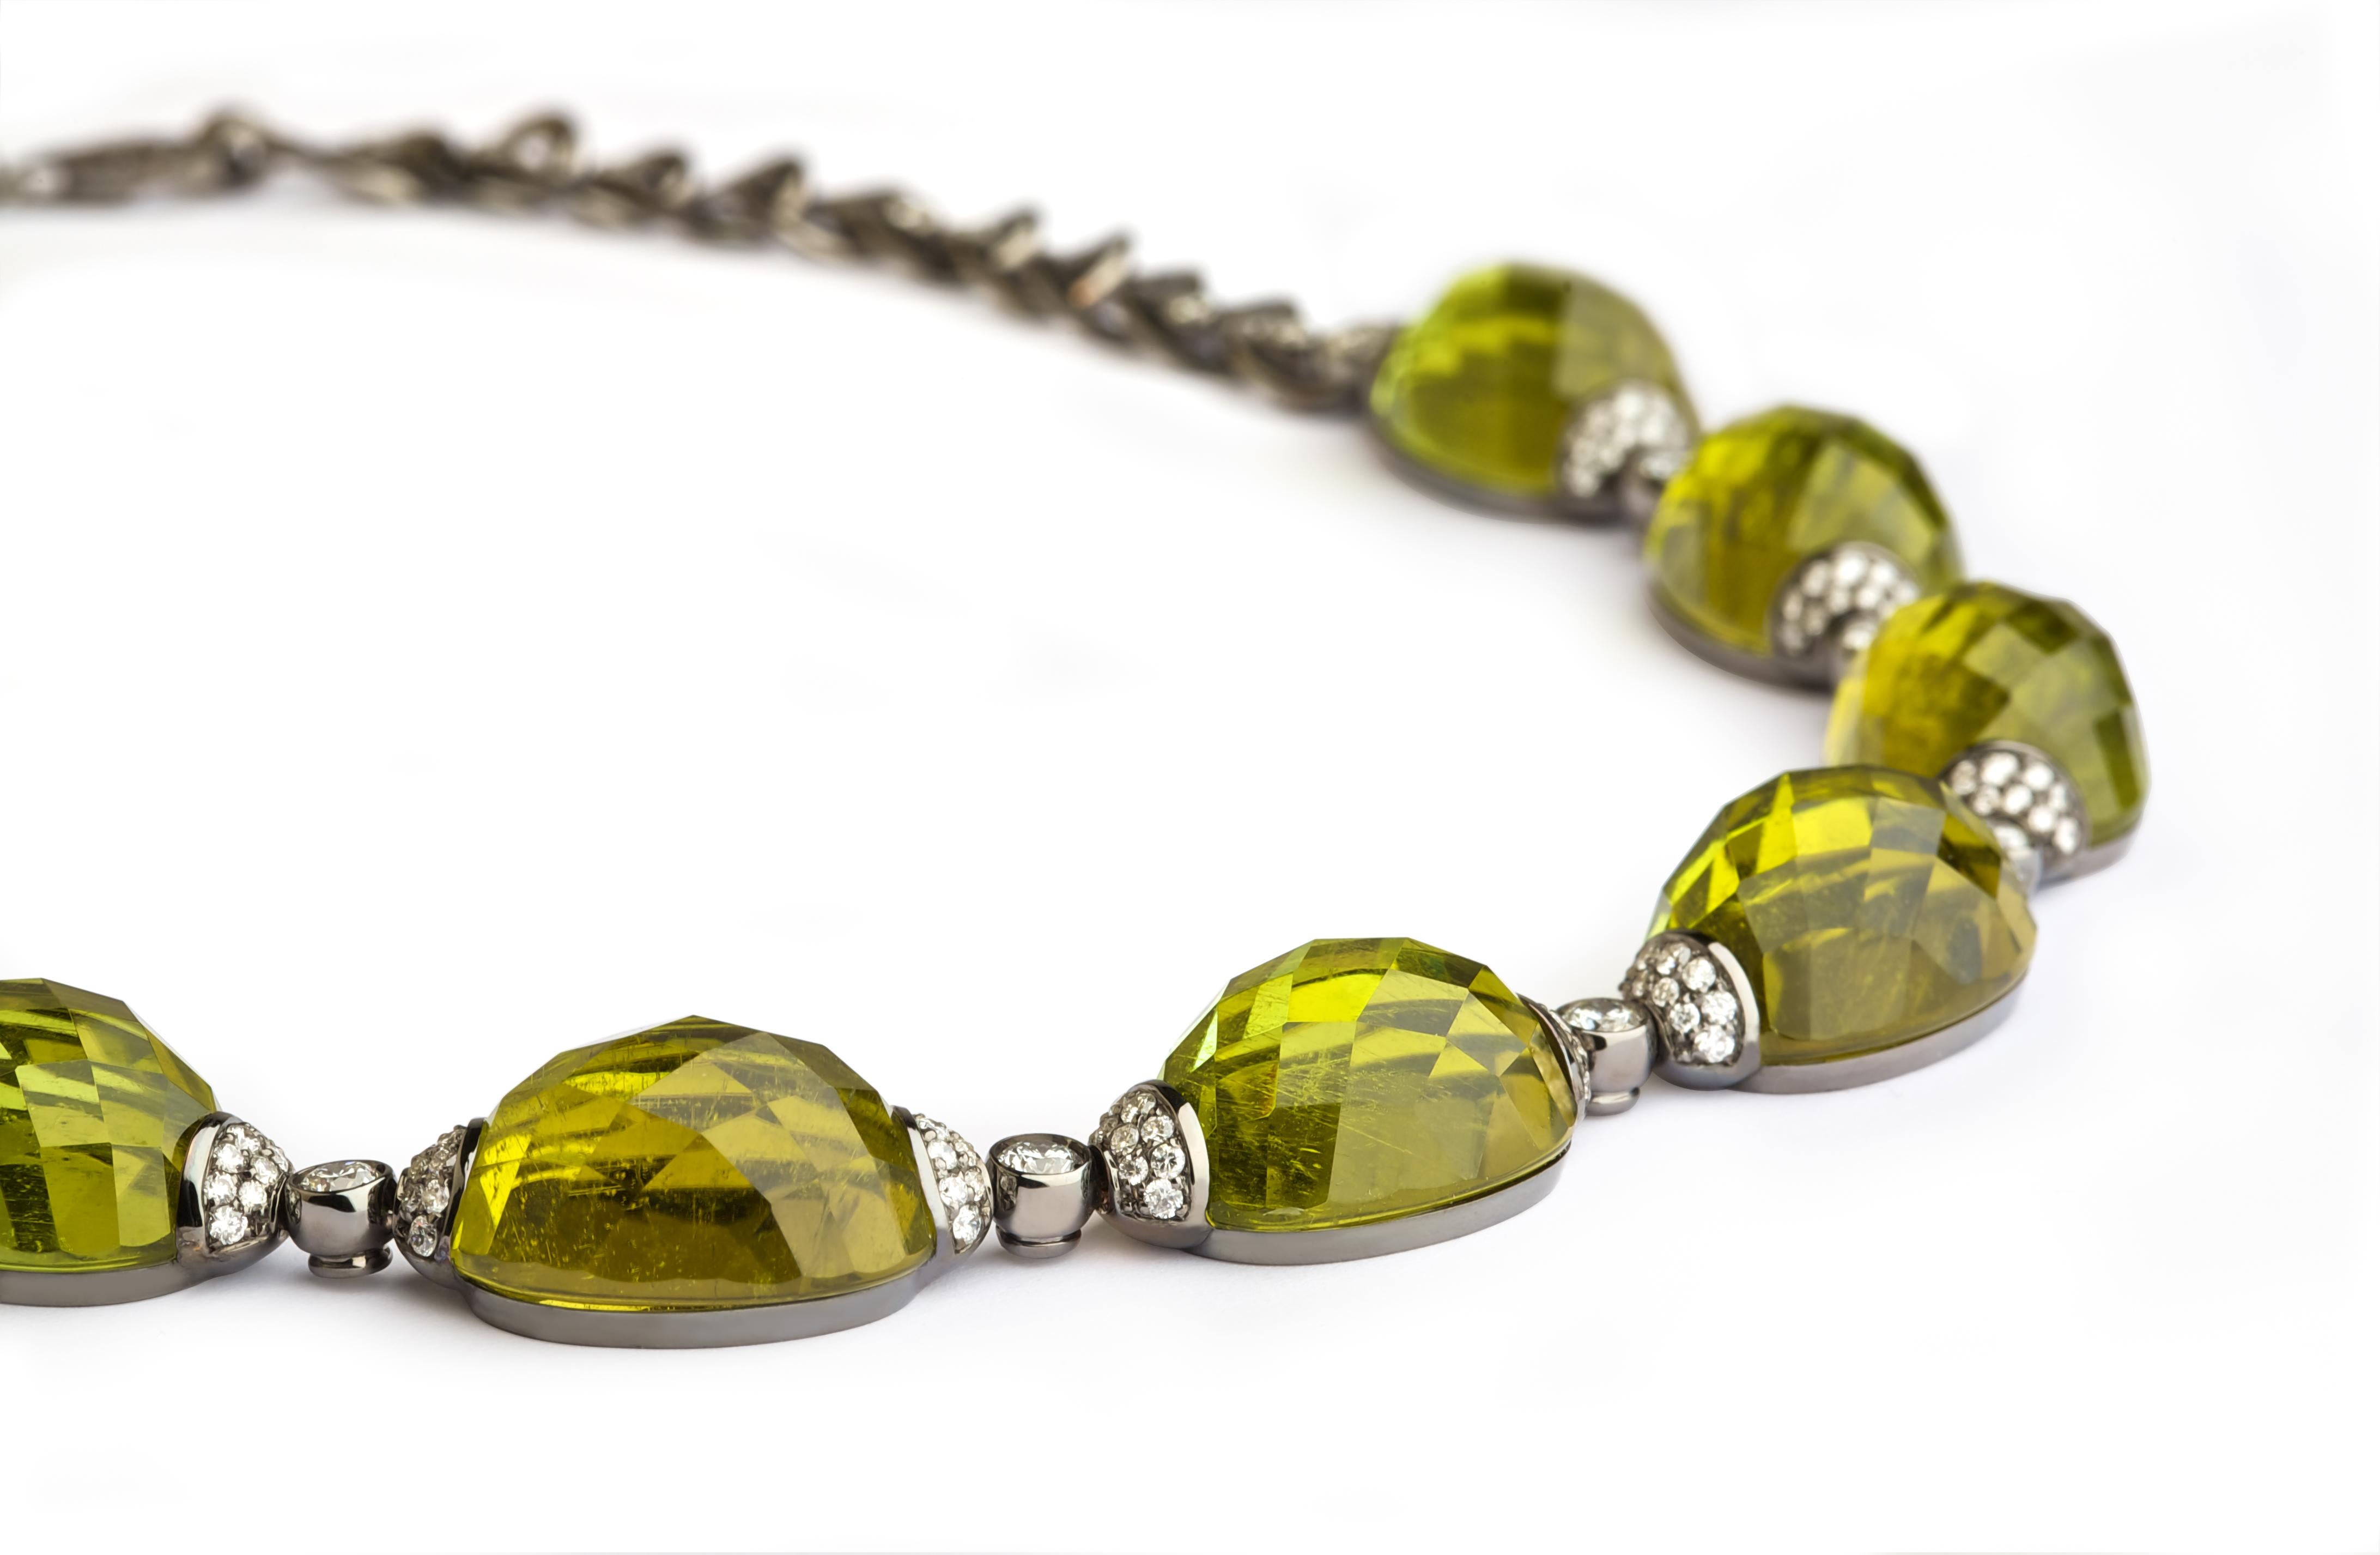 Embrace Collection by Angeletti. Faceted Light Green Tourmaline From Unique Stone, Diamonds and Gold.
Exceptional Tourmaline of around ct. 200 Cut into 9 Stones and faceted by Expert Hands. Wholly Natural, No treatment at all. The Light Green